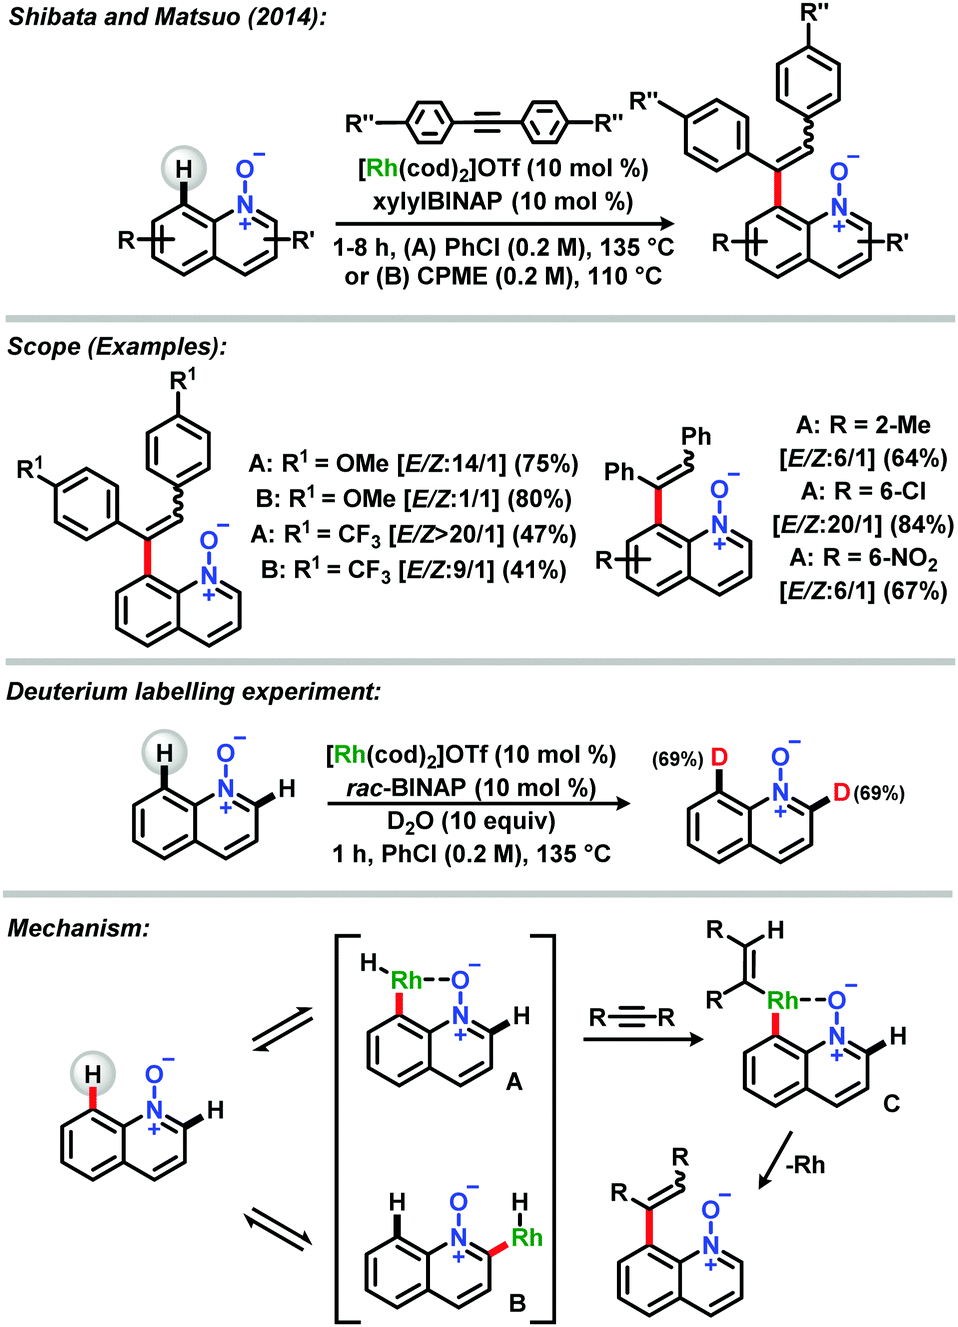 Weakly Coordinating N Oxide And Carbonyl Groups For Metal Catalyzed C H Activation The Case Of A Ring Functionalization Chemical Communications Rsc Publishing Doi 10 1039 C8cca